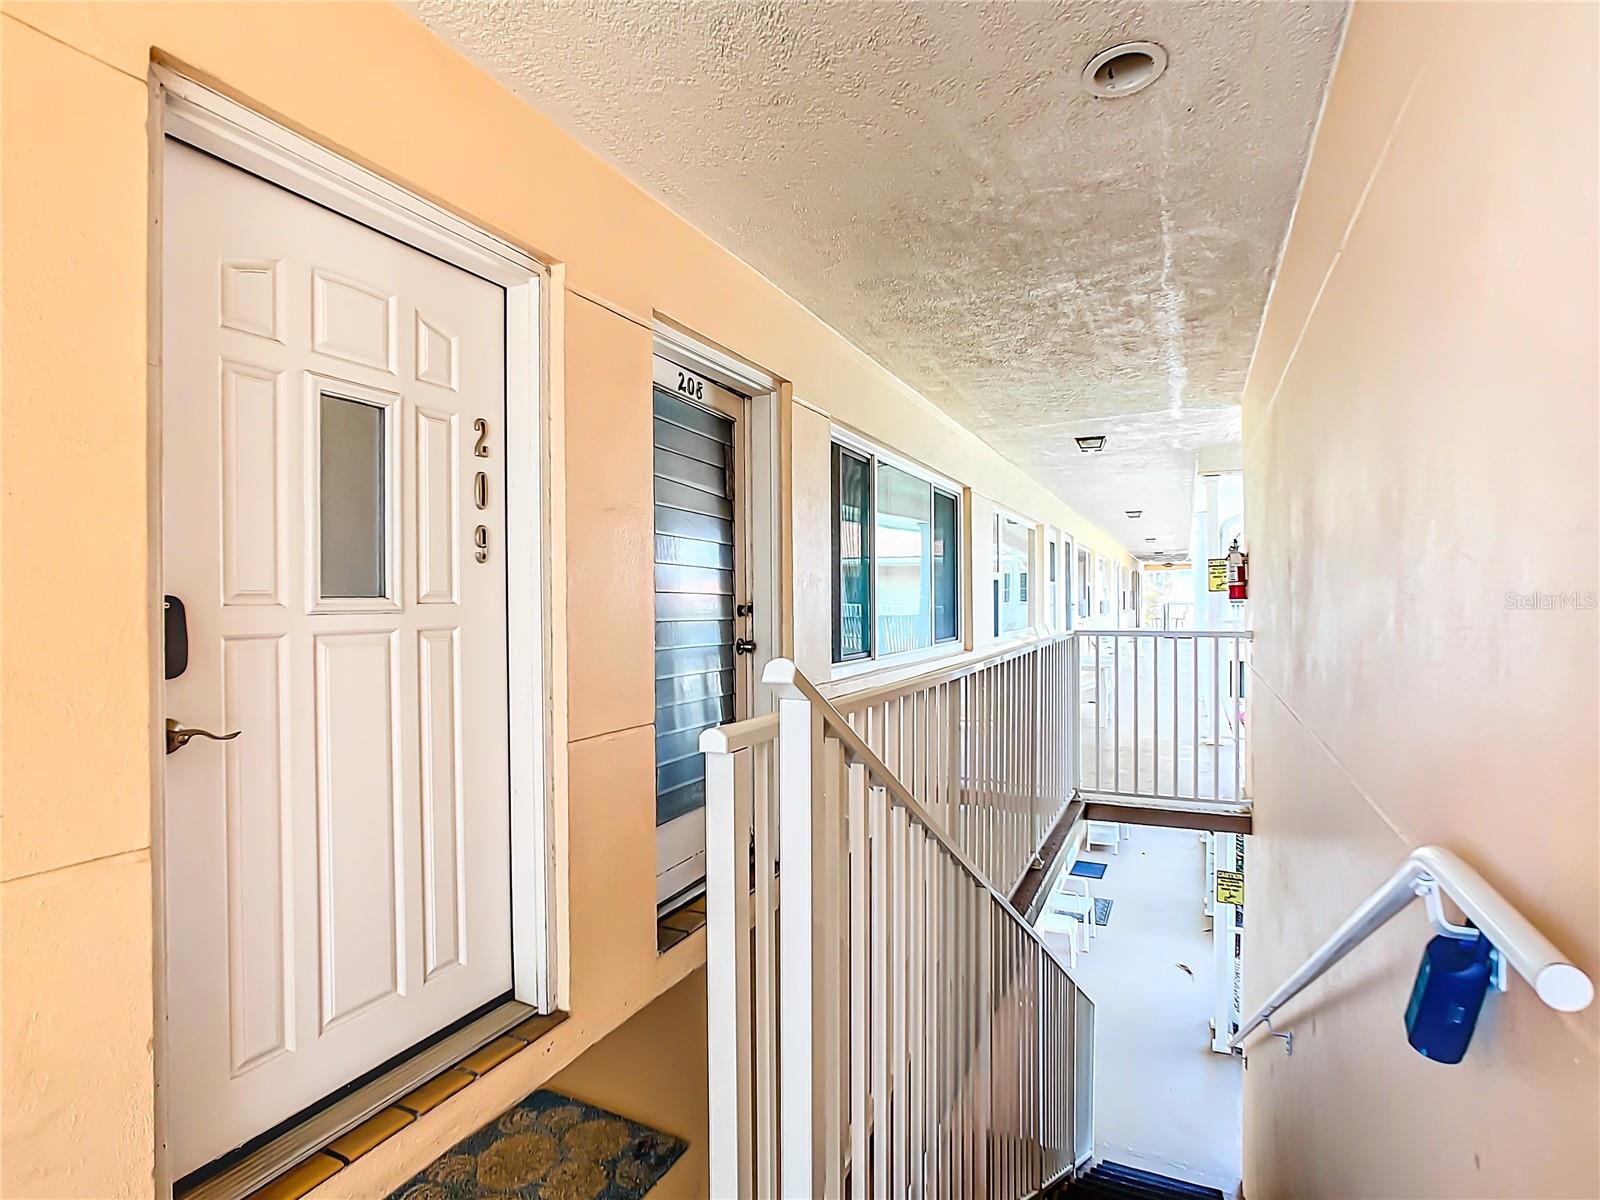 Unit 209 at 7740 Boca Ciega Dr- Once you get to the top of the stairs, the unit is immediately there.